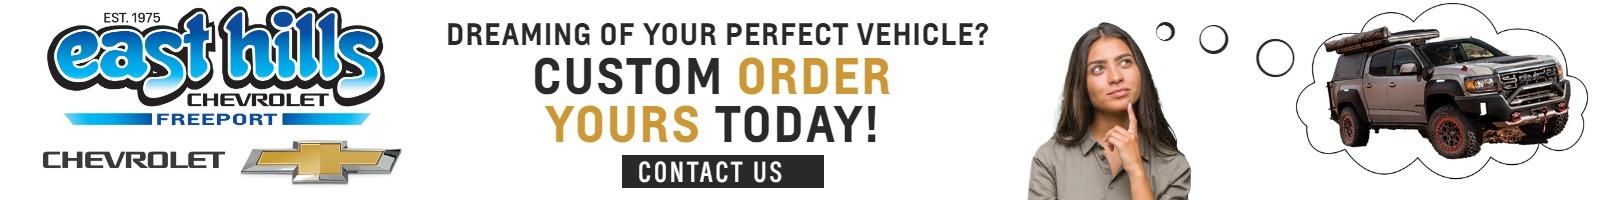 Dreaming of your perfect Chevrolet?
Order Yours Today!